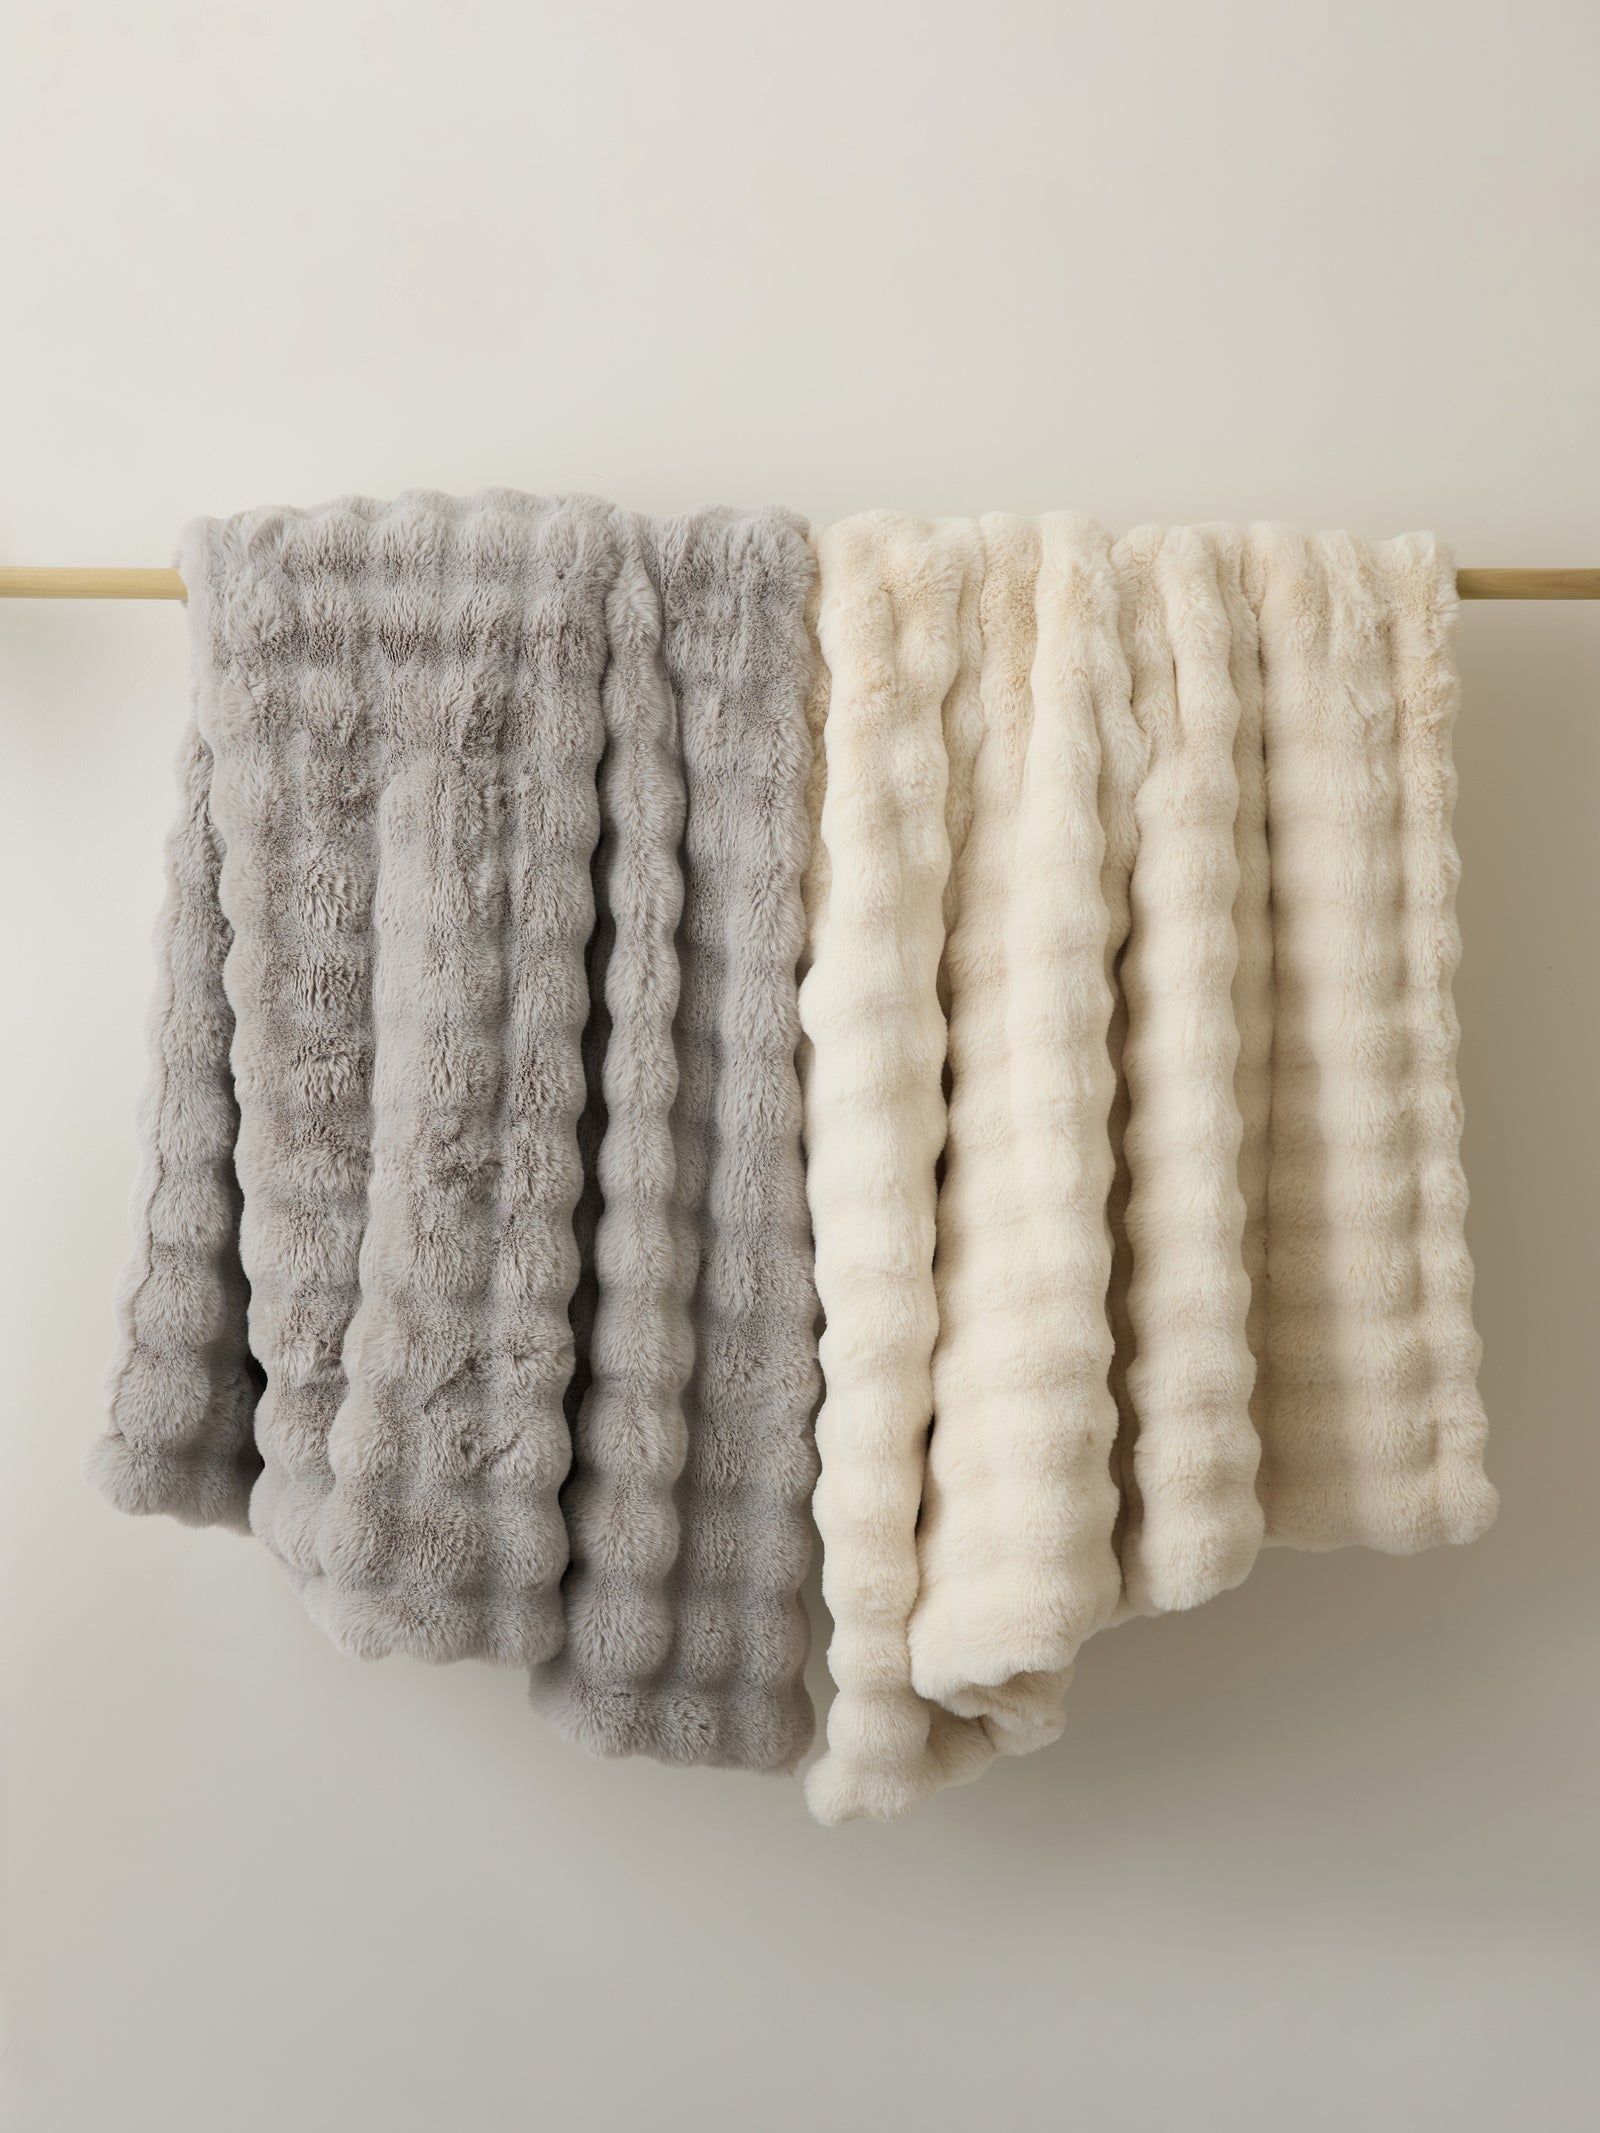 Light grey and creme lush faux fur blankets hanging on wooden rail